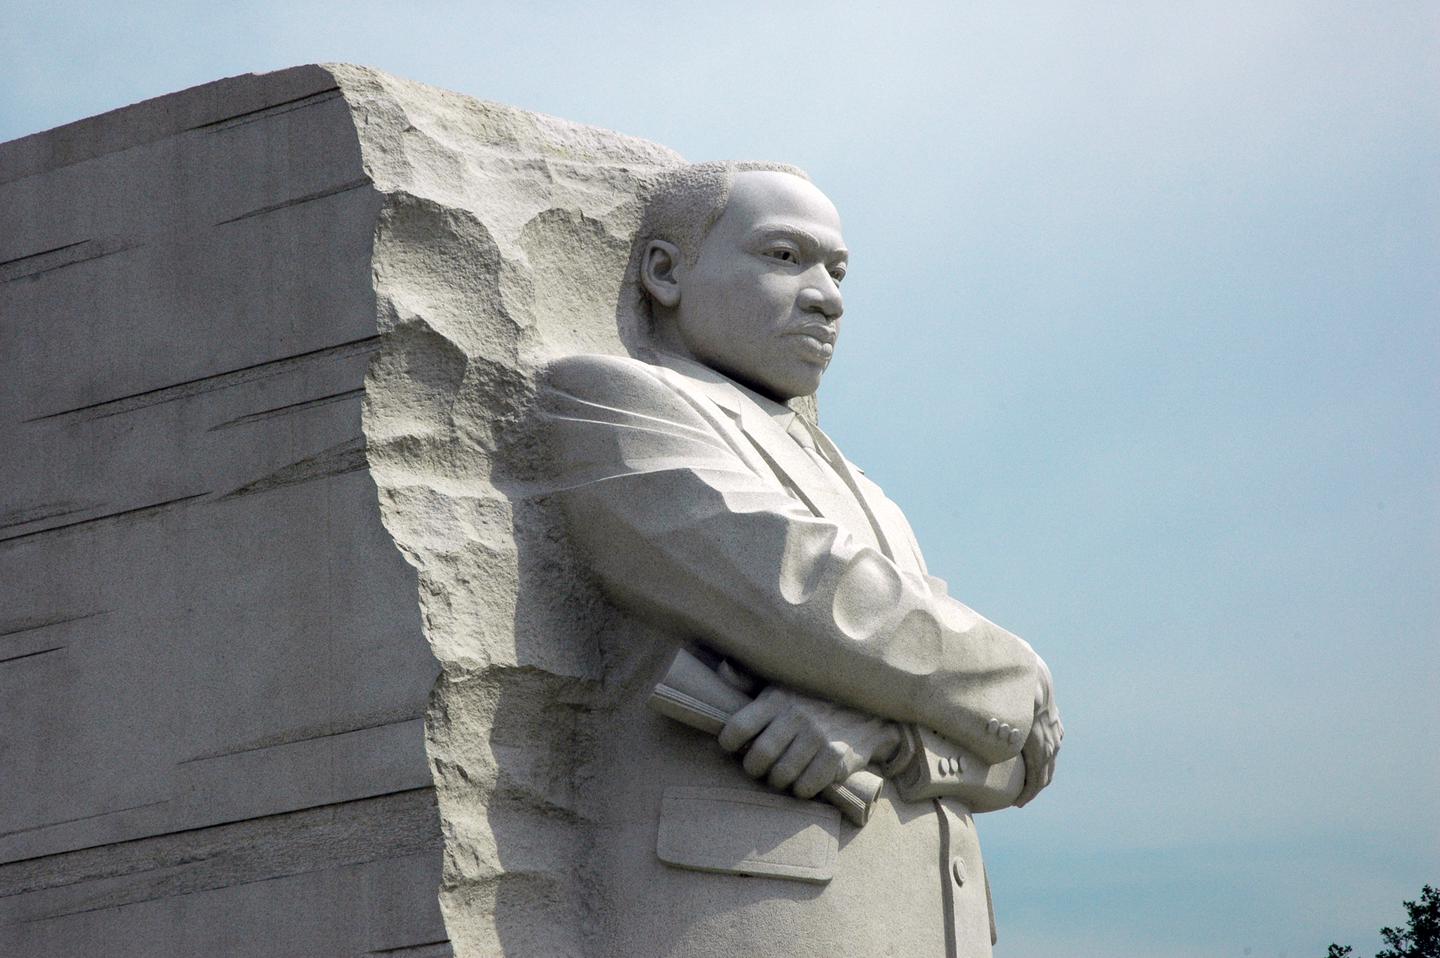 Preview photo of Martin Luther King, Jr. Memorial National Memorial